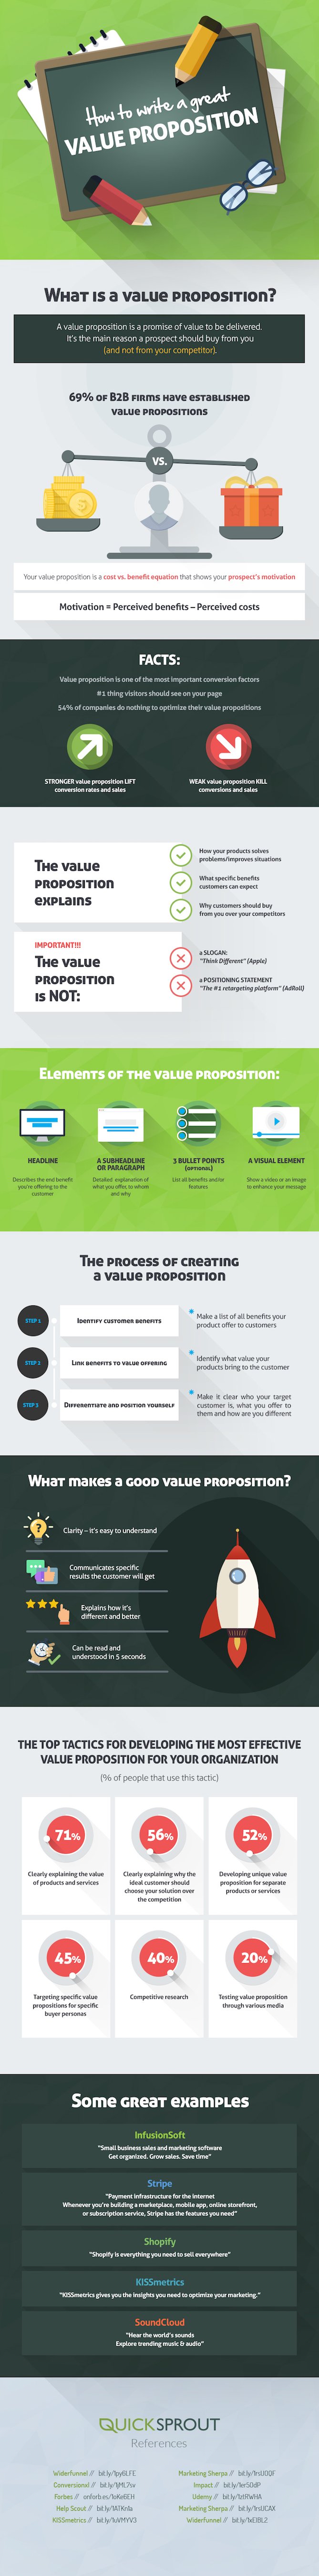 How to write a value proposition for your content marketing strategy.